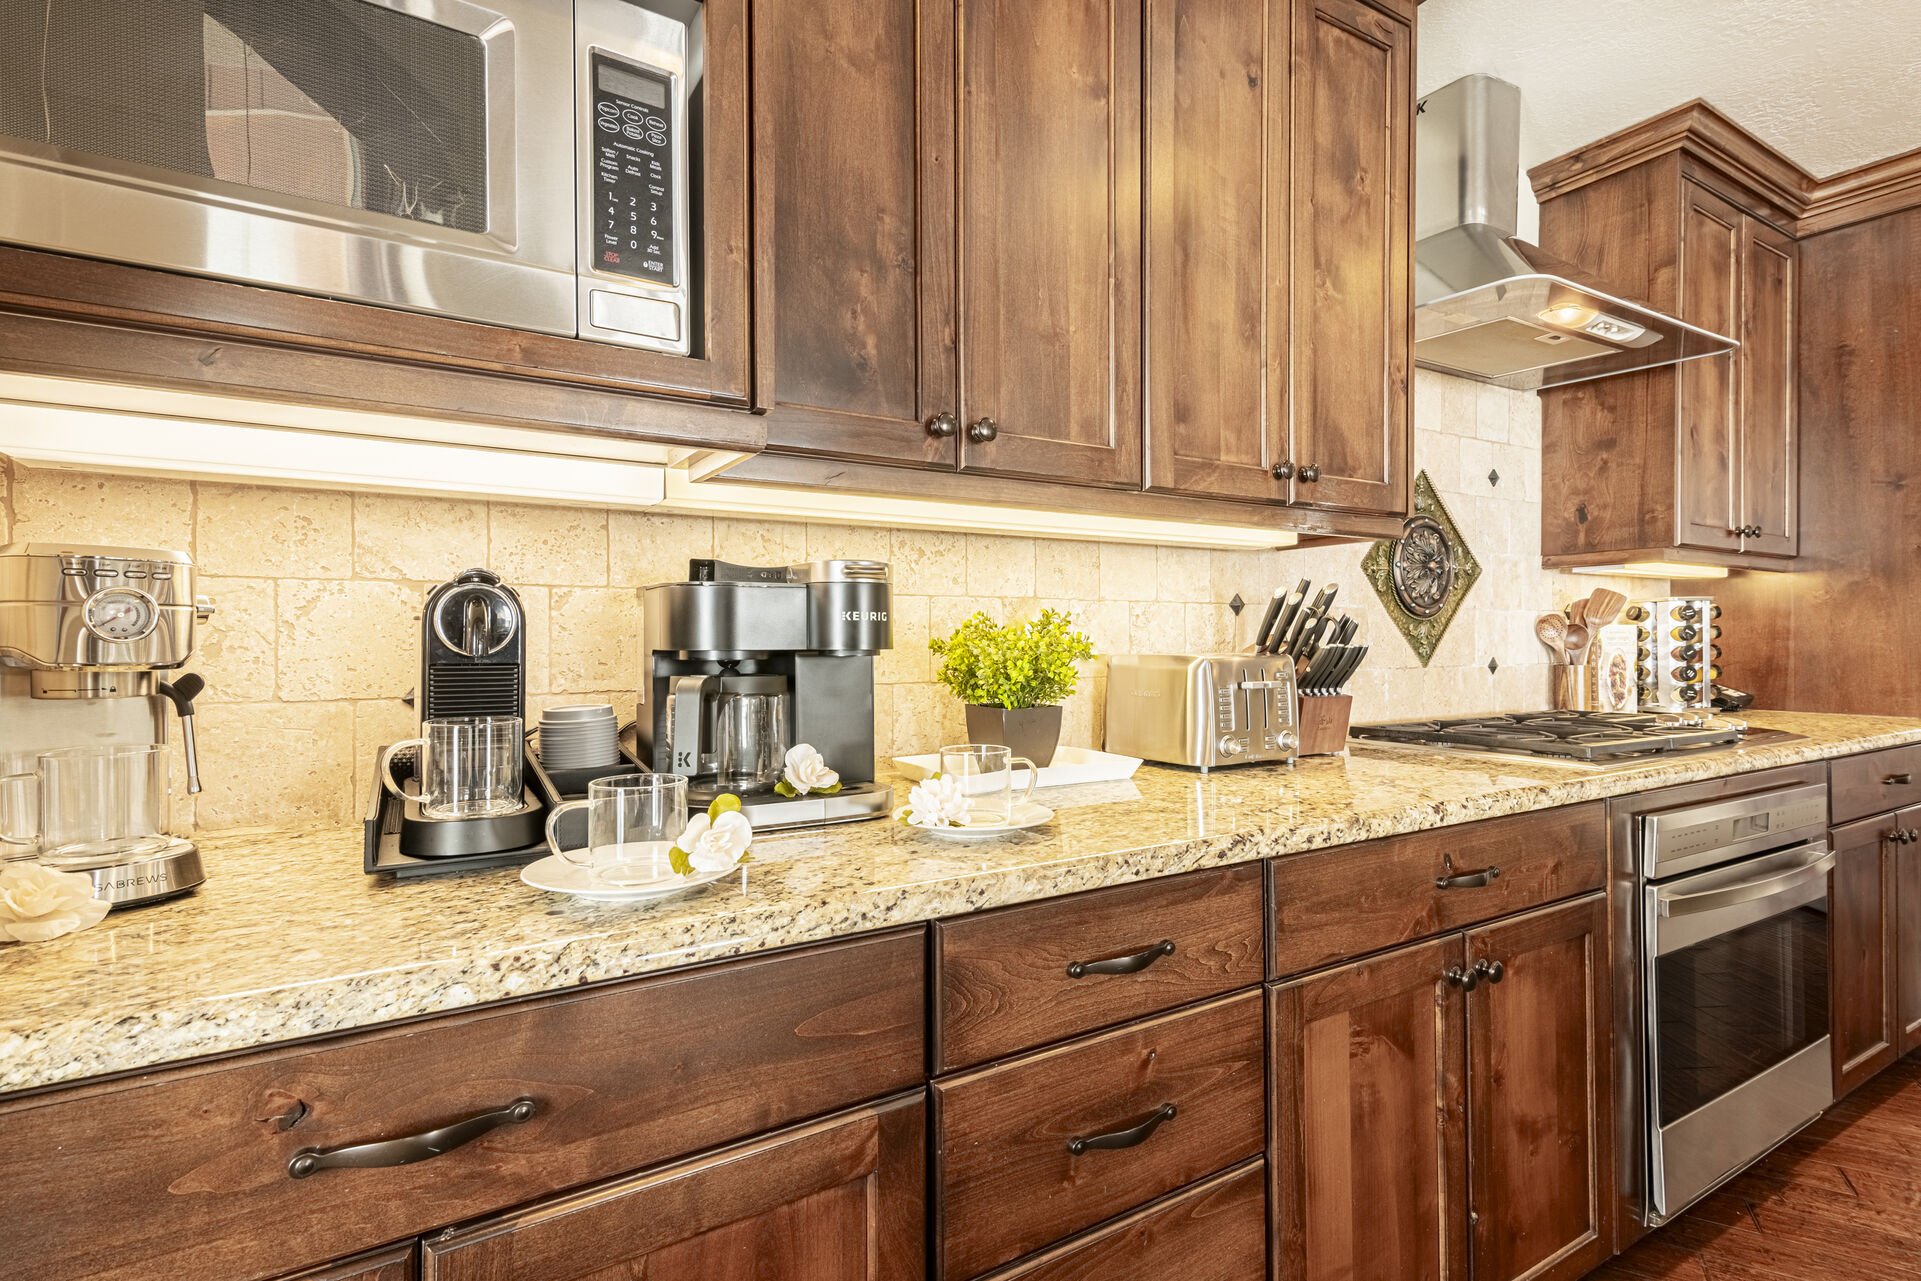 Fully equipped kitchen offering a Keurig and drip coffee maker